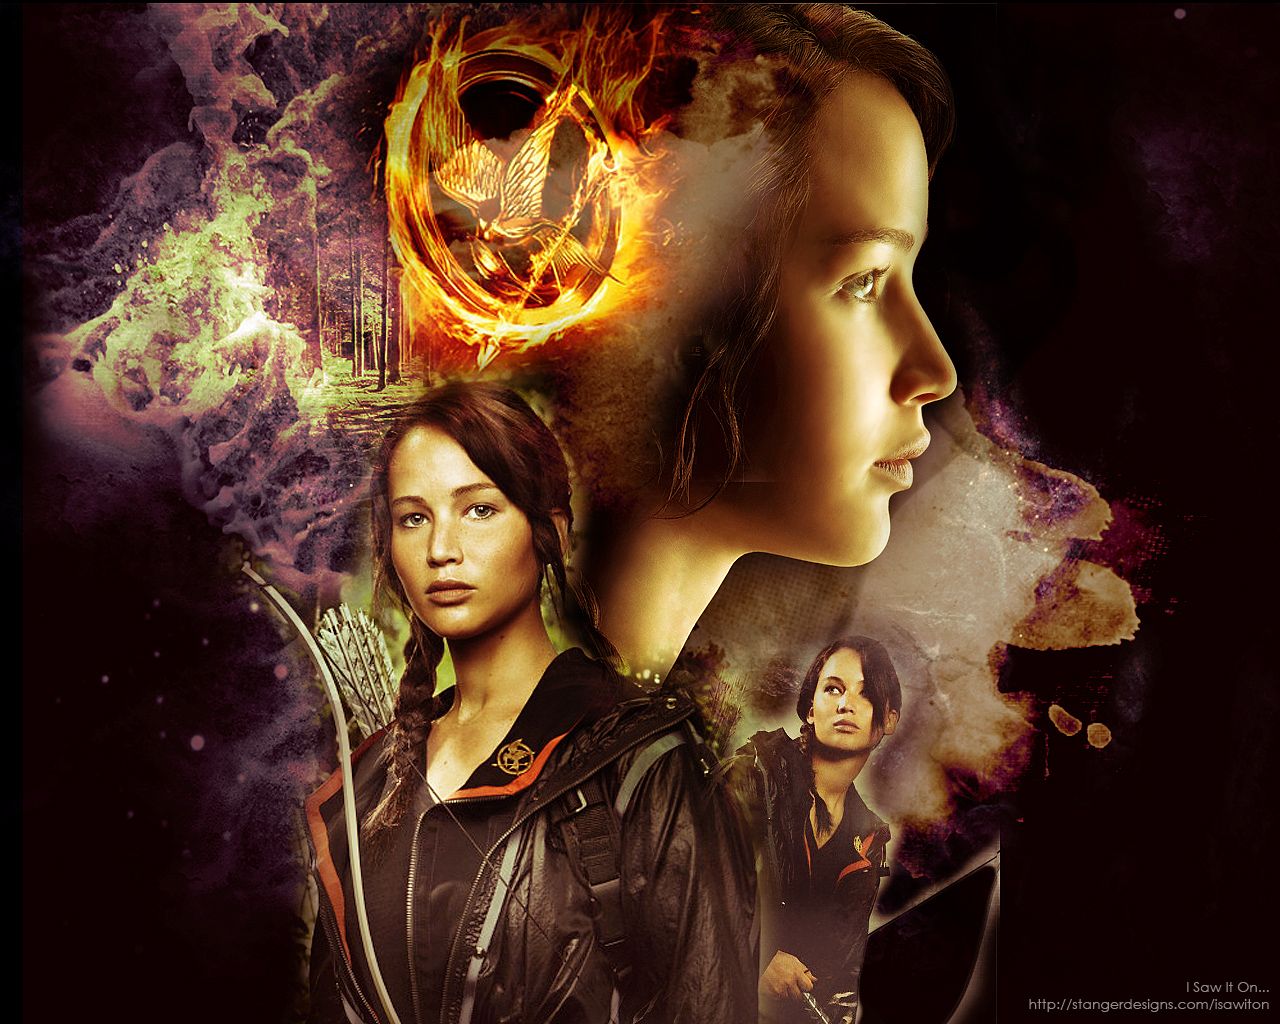 New The Hunger Games Wallpapers | I Saw It On…